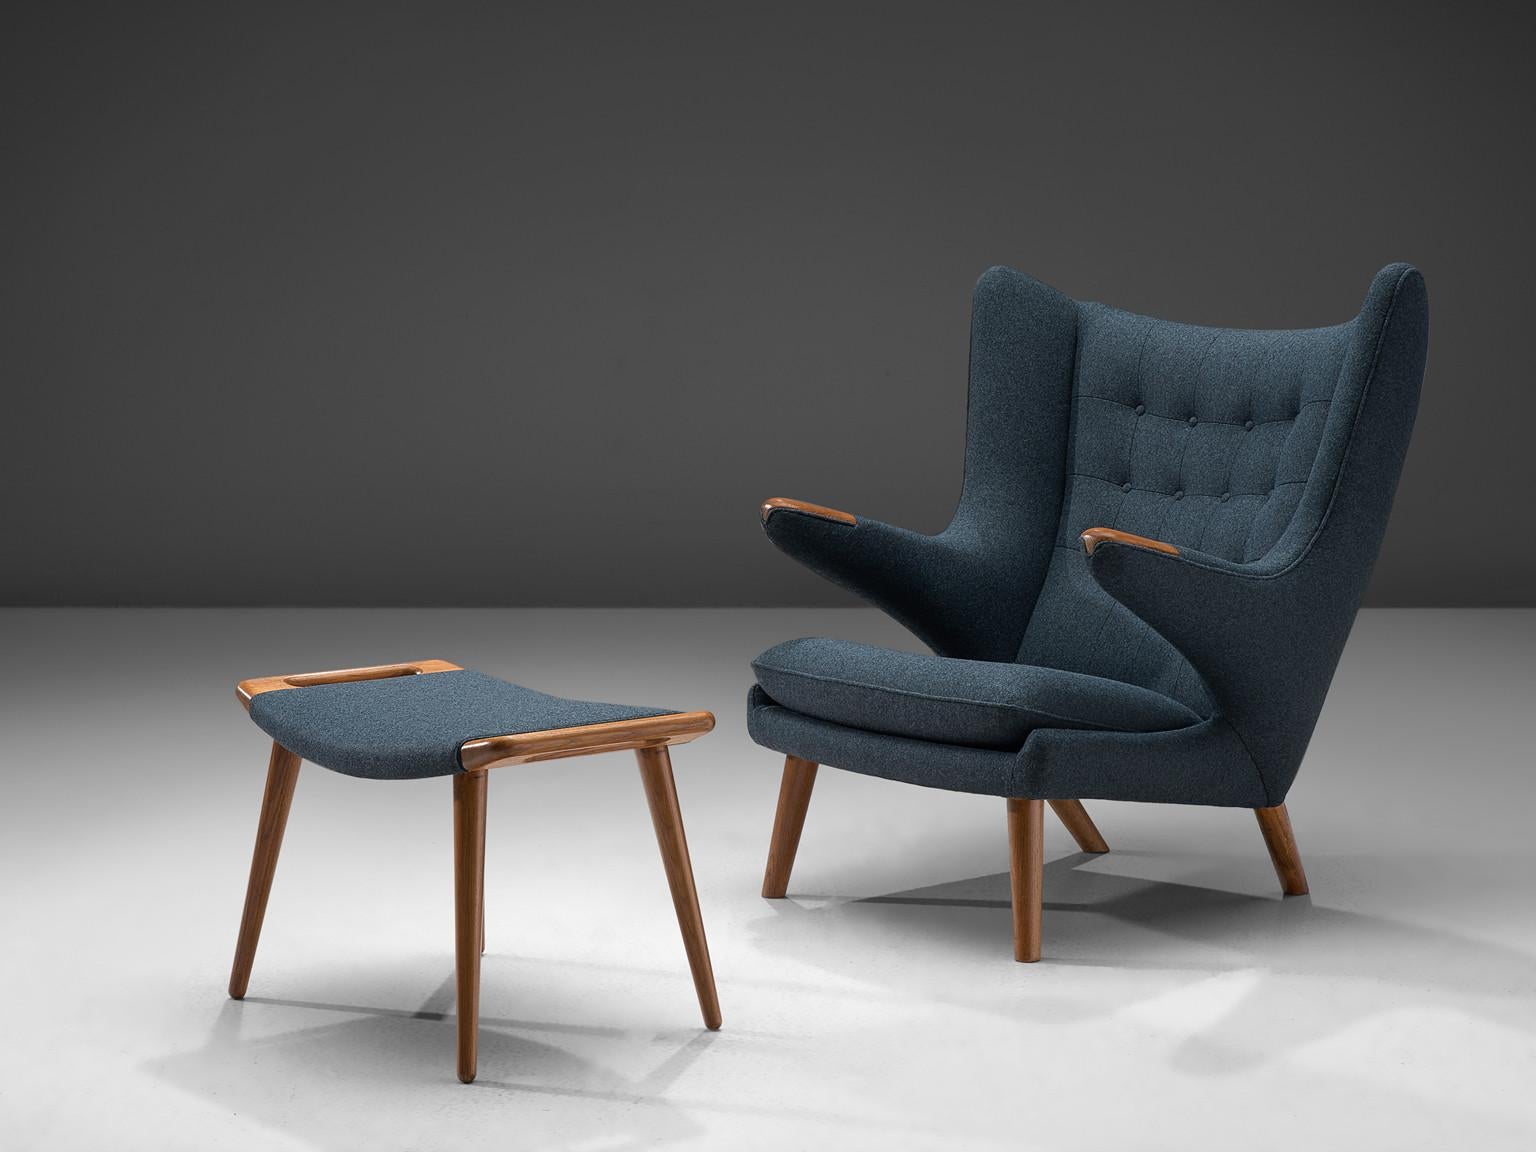 Hans J. Wegner for AP Stolen, easy chair with ottoman, model AP 19 Papa Bear, fabric, oak, Denmark, designed in 1951, production later,

This semi-wingback armchair, has an open expression in contrast with its historical ancestors. Wegner made a